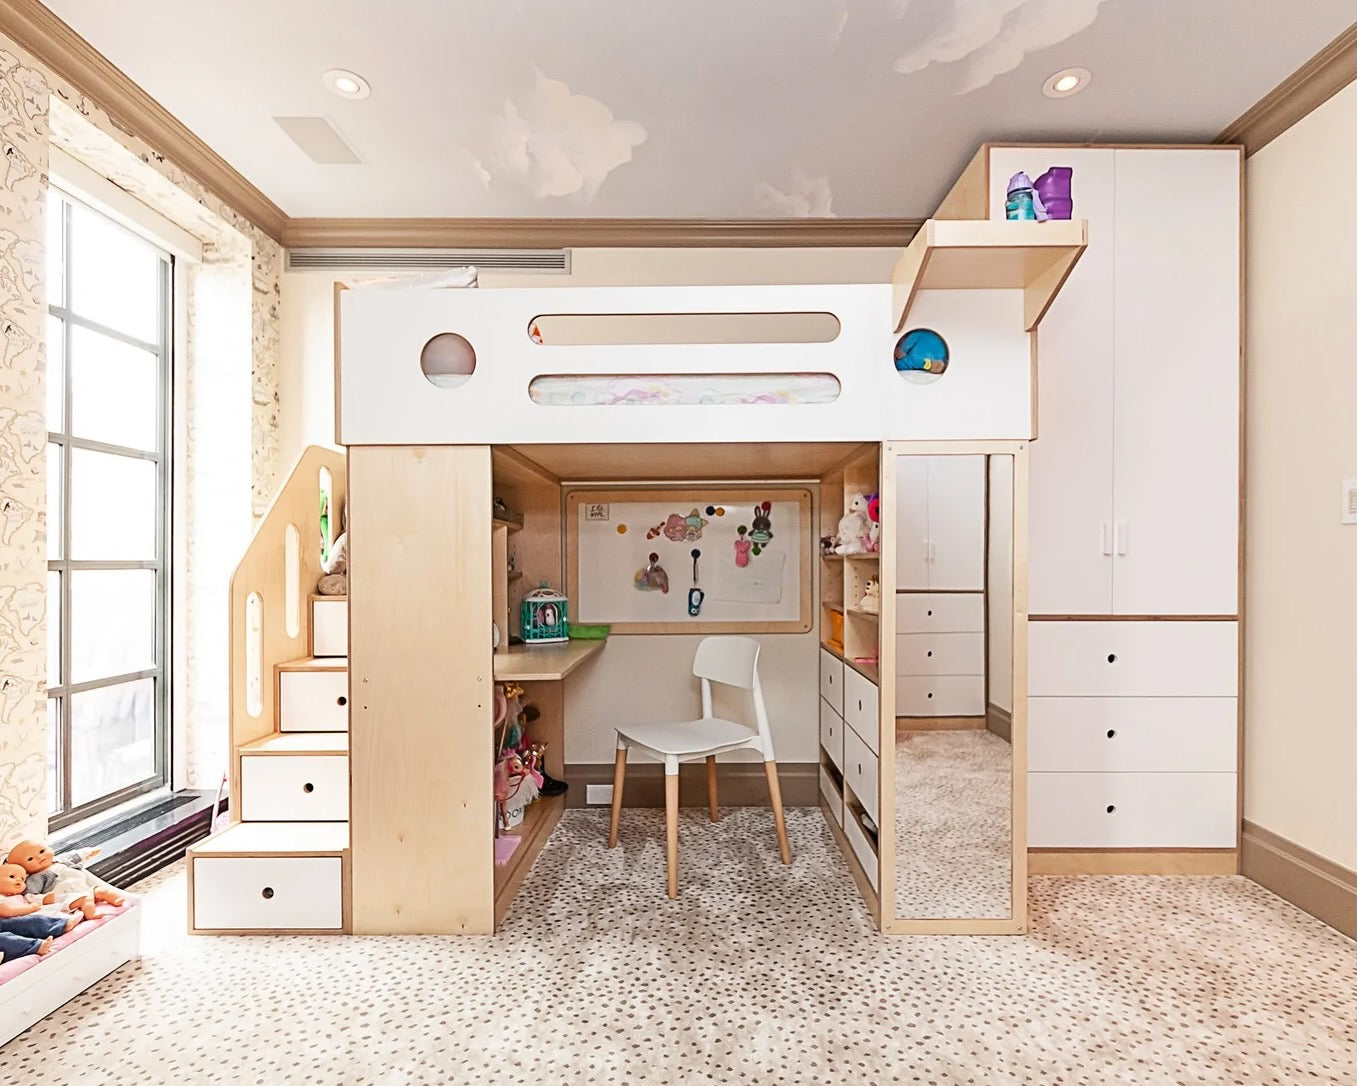 Child’s bedroom with loft bed, desk, storage stairs, and spotty rug.